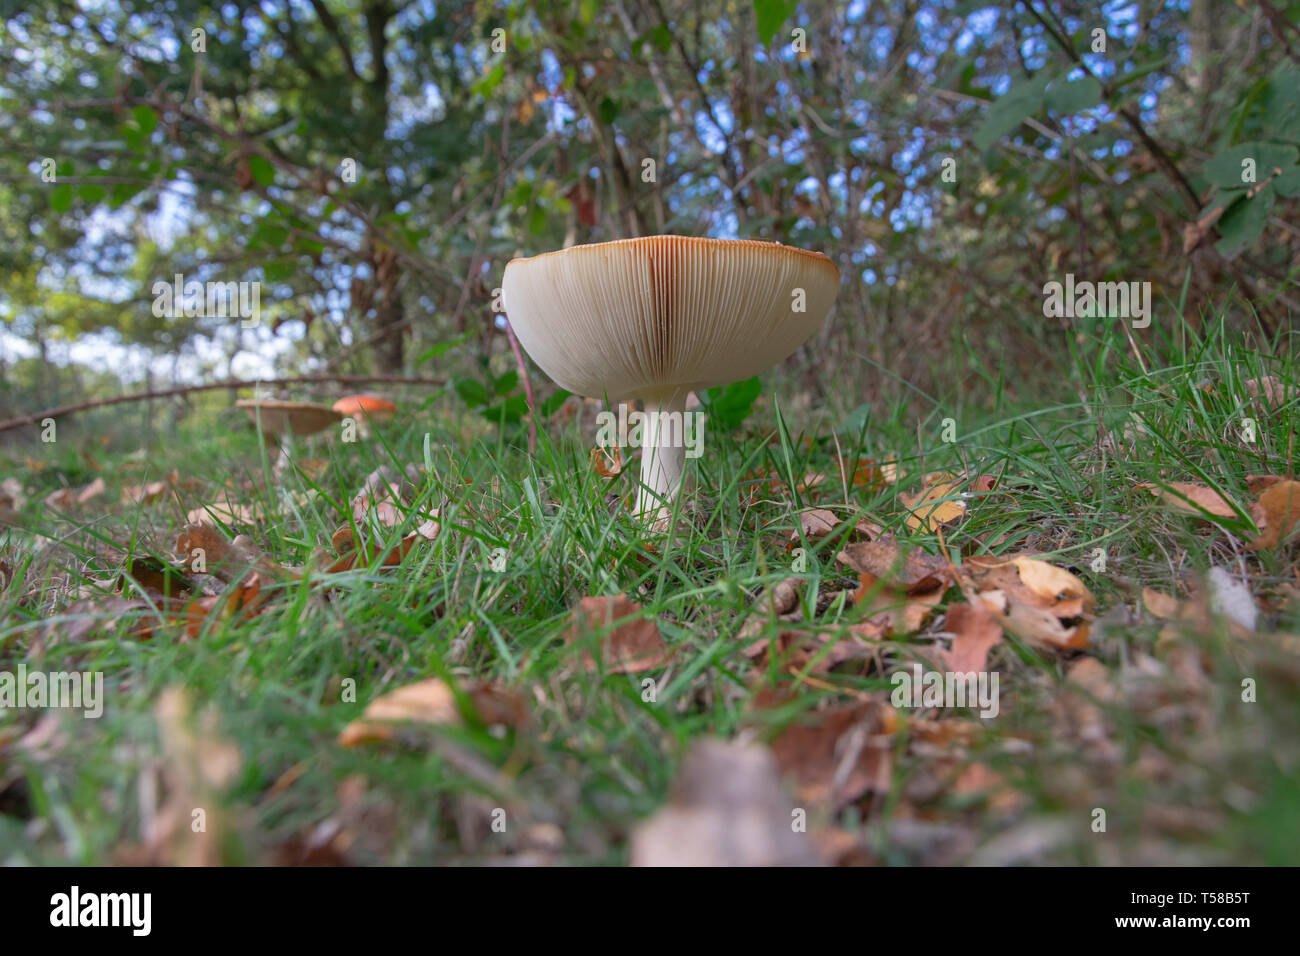 one Amanita muscaria, commonly known as the fly agaric or fly amanita in the forest Stock Photo